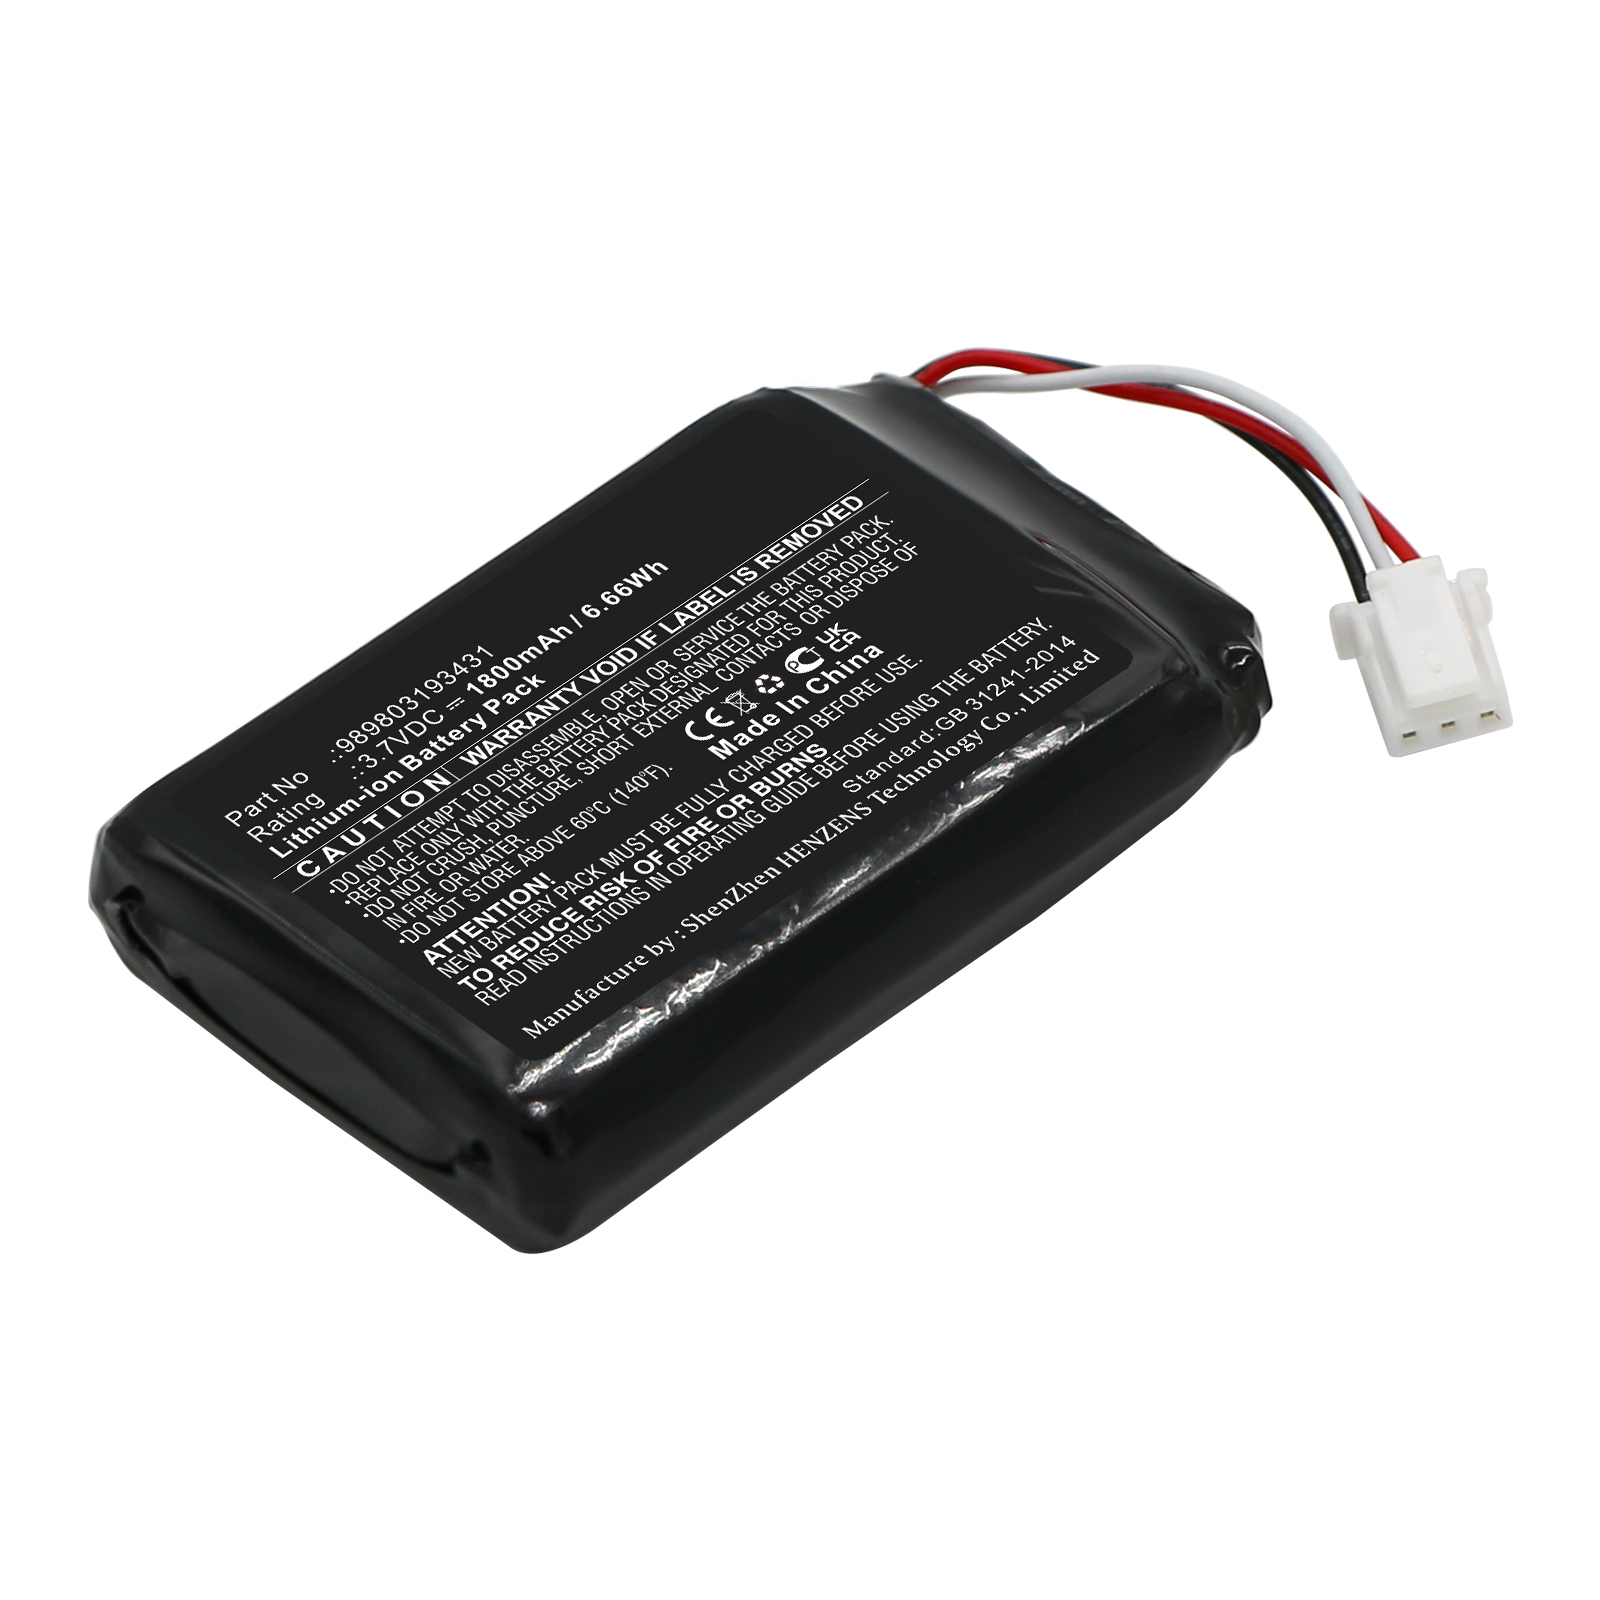 Synergy Digital Medical Battery, Compatible with Philips 989803193431 Medical Battery (Li-ion, 3.7V, 1800mAh)